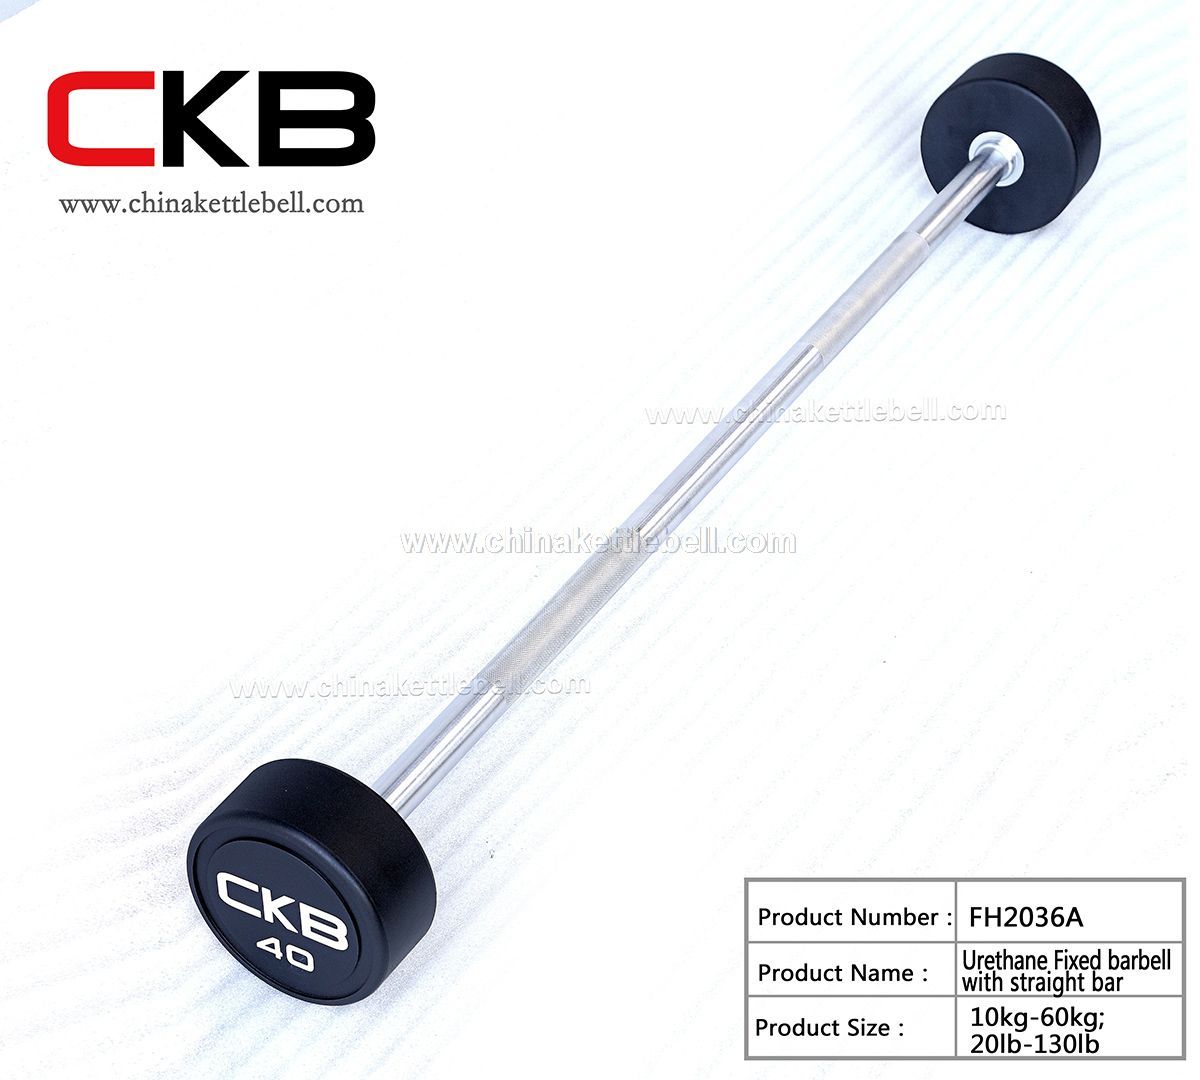 Urethane Fixed barbell with straight bar